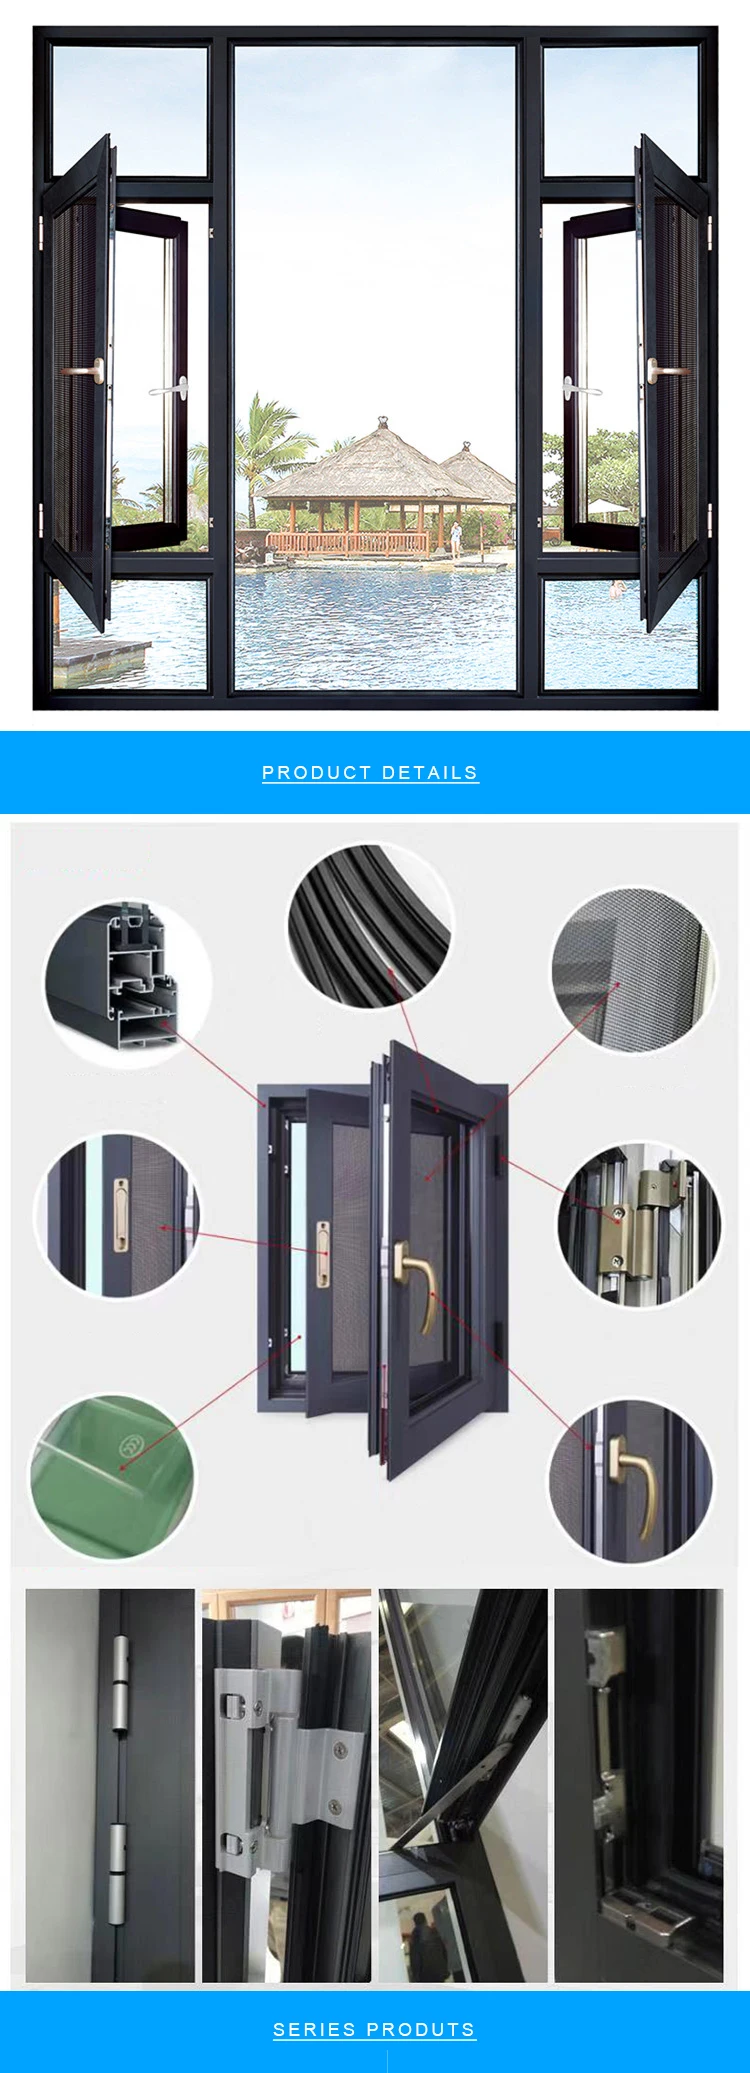 Interior Office Commercial Awnings Aluminum Frame Covers Casement Window Stay